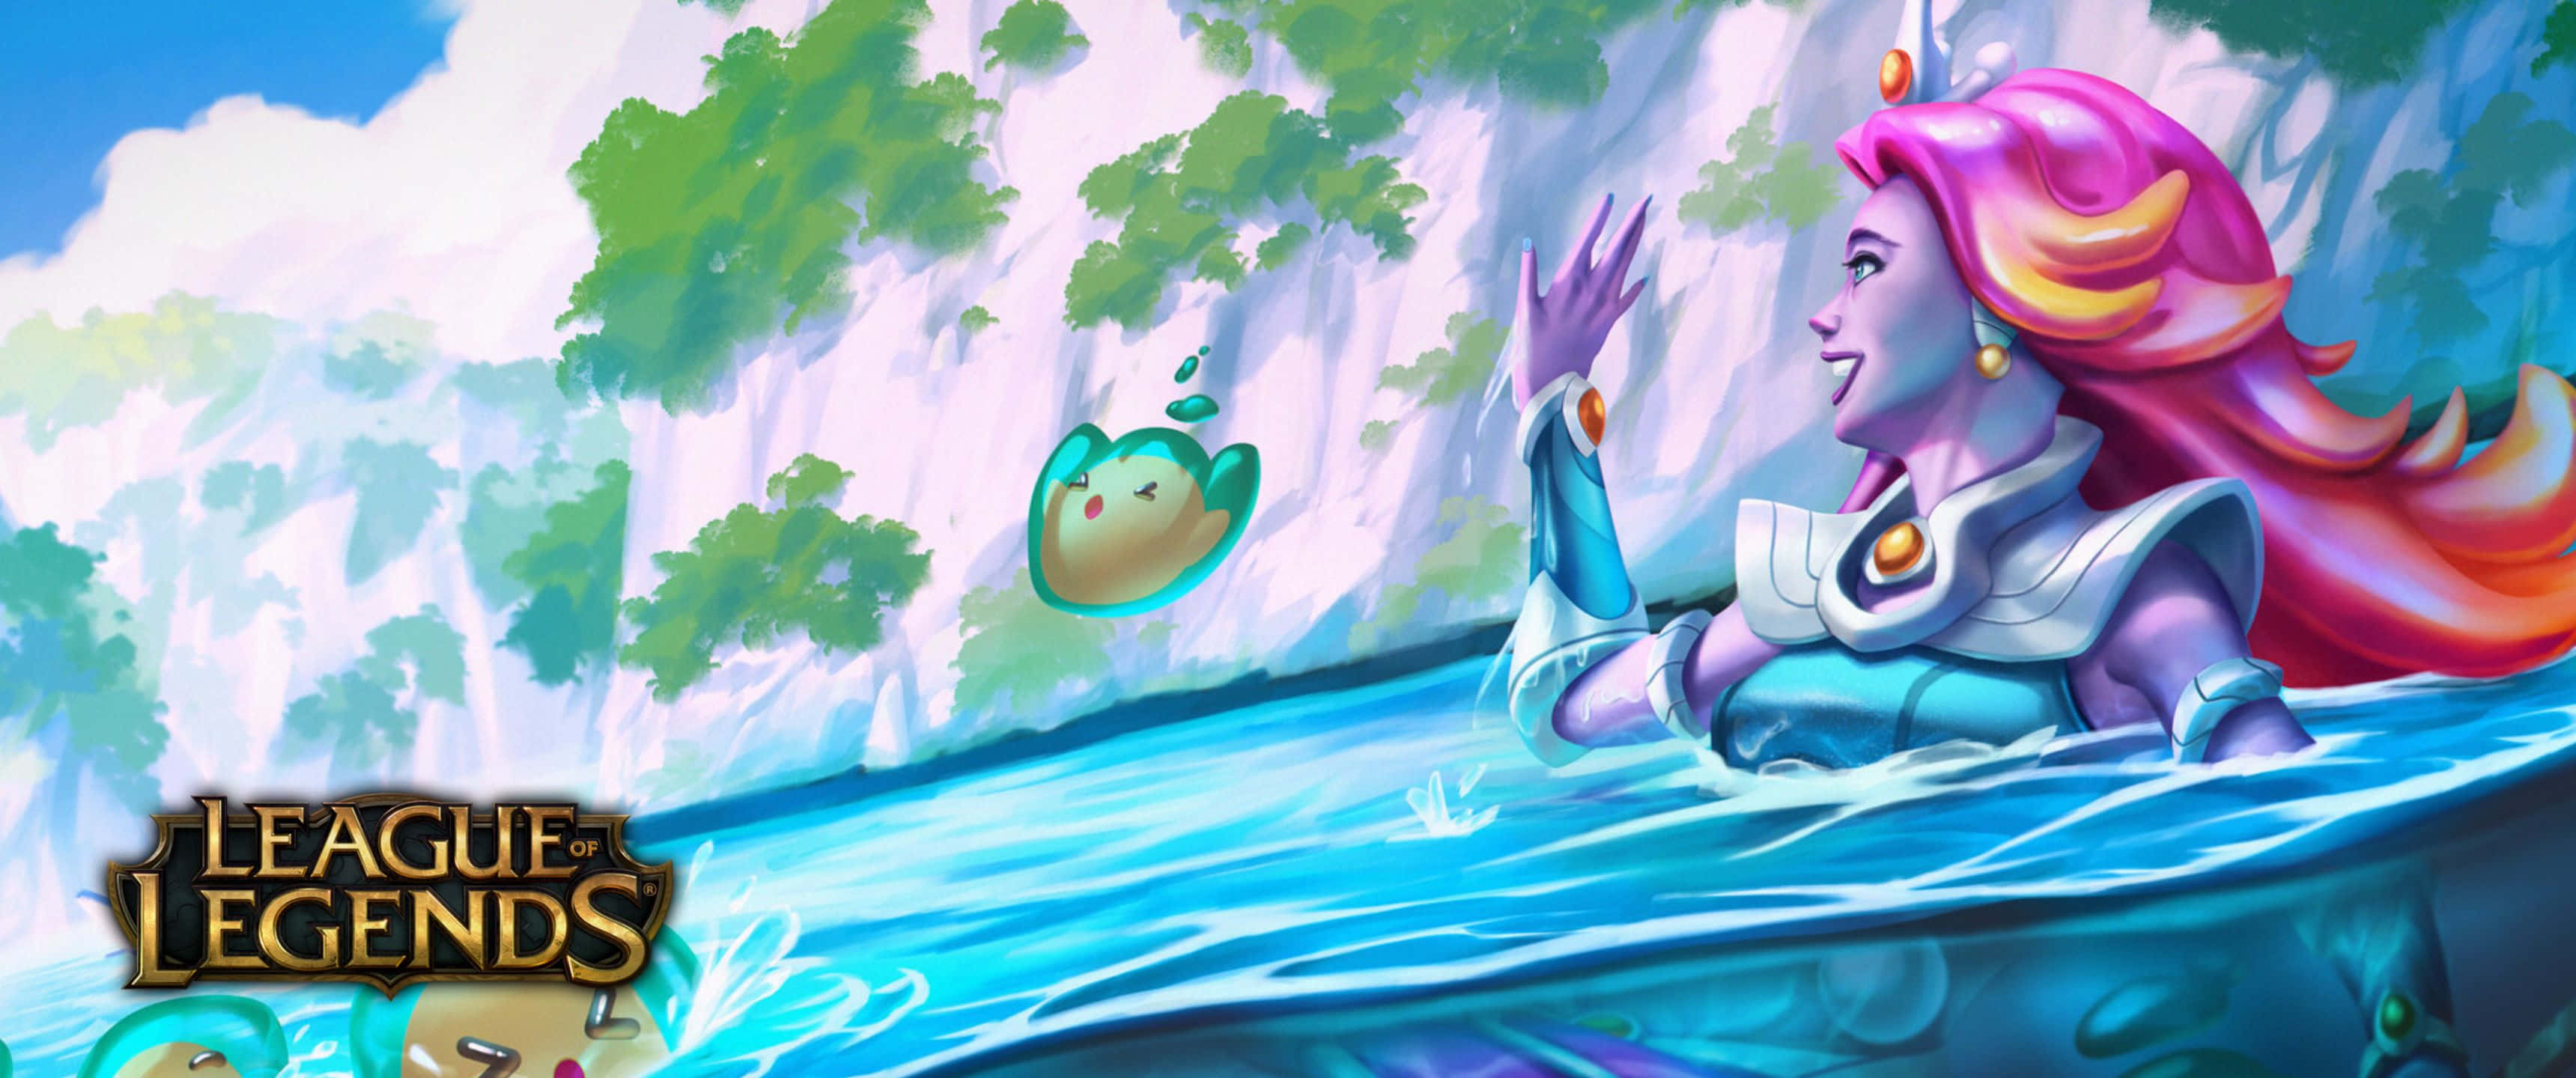 Space Groove Nami 3440x1440p League Of Legends Background